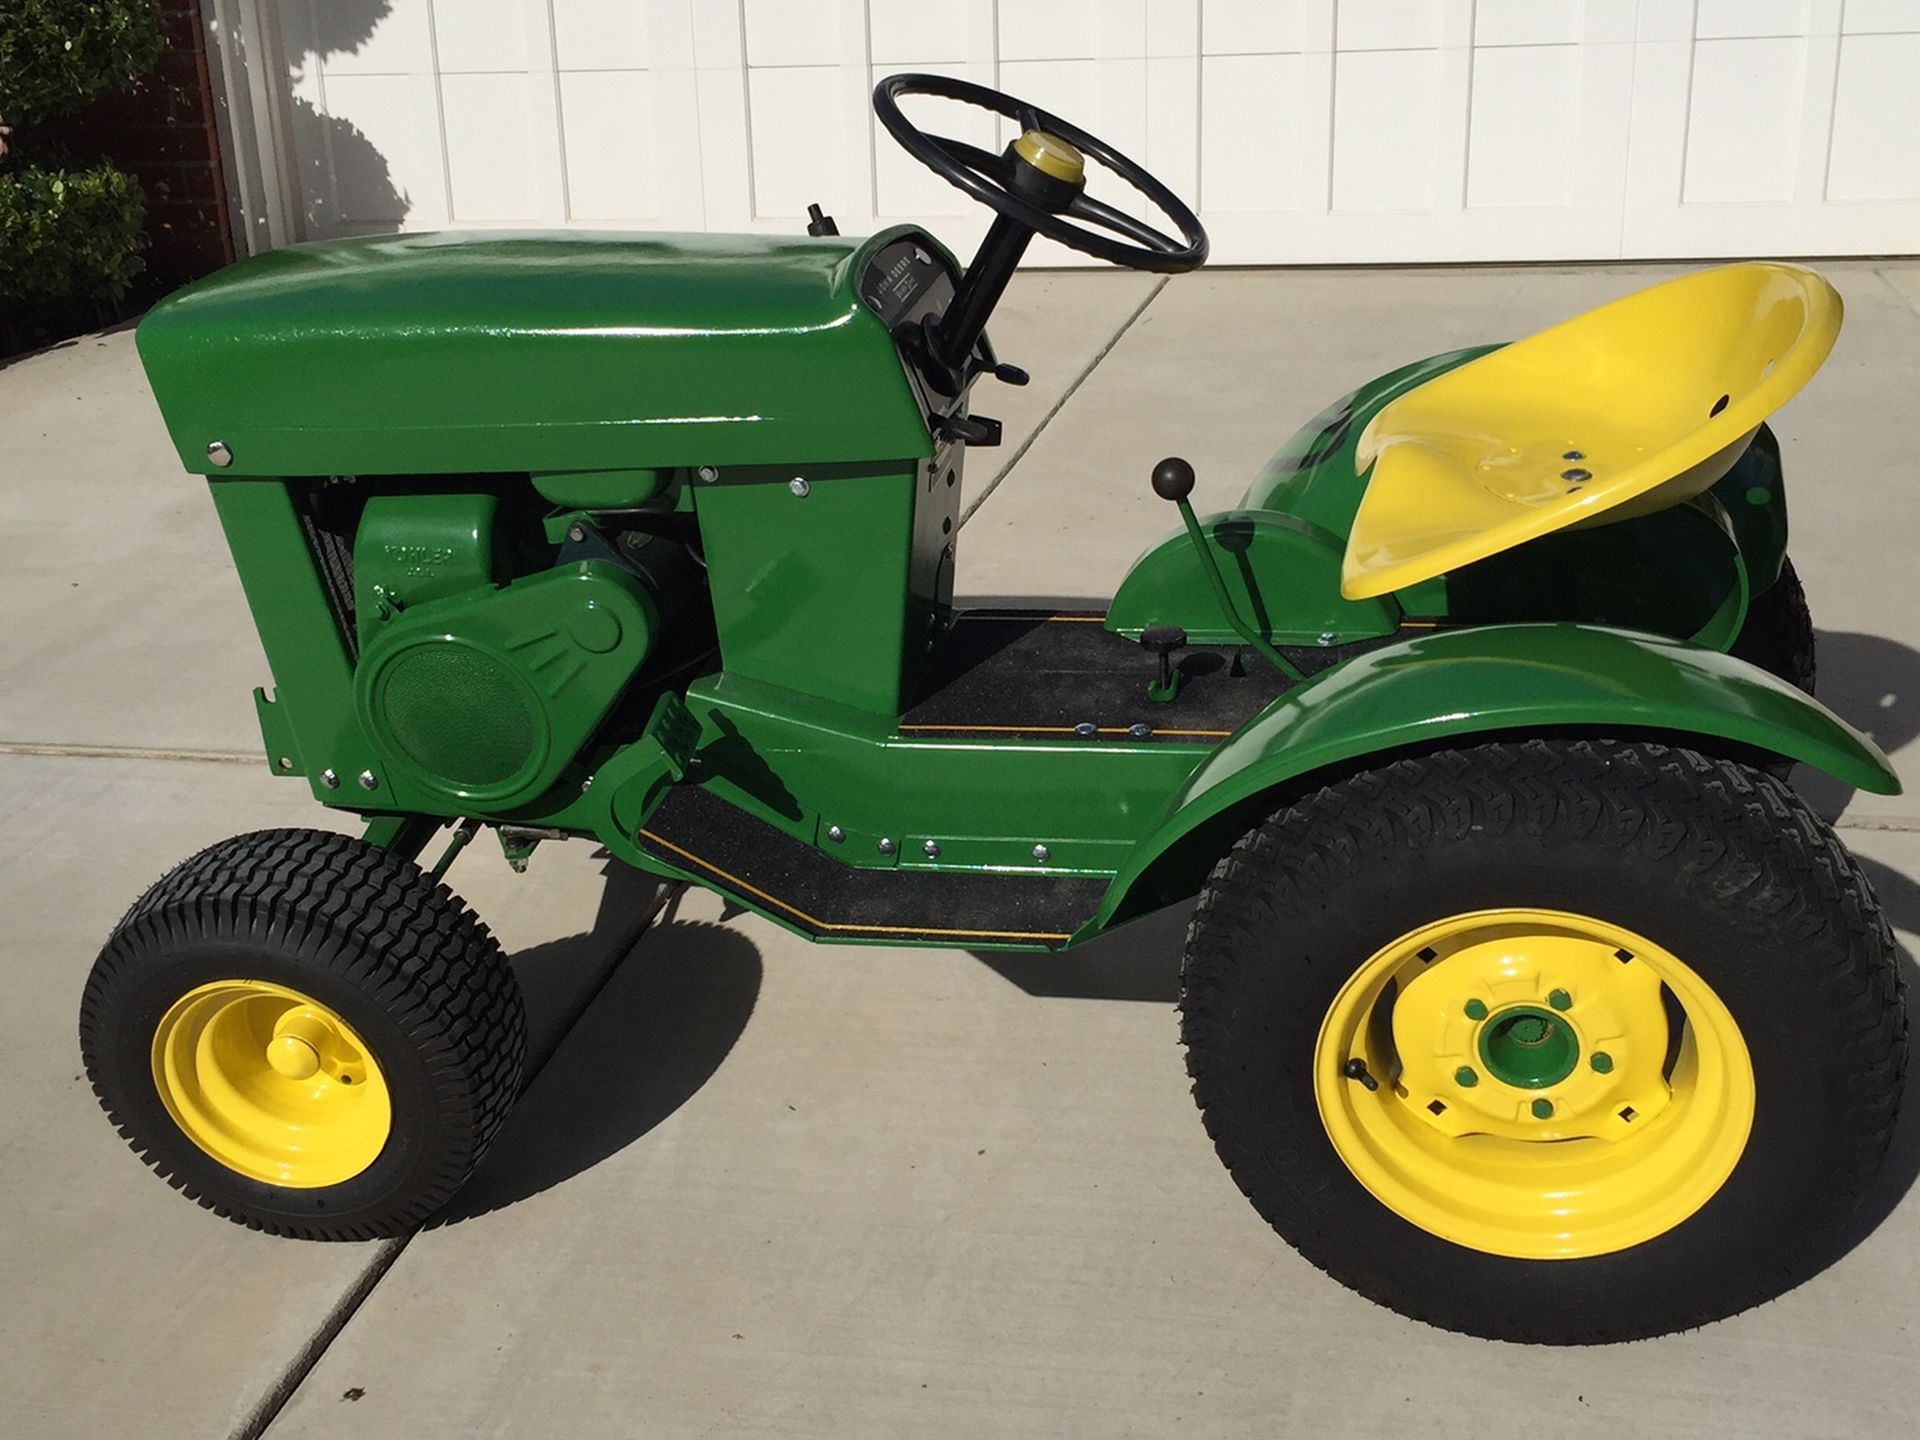 1966 John Deere 110 Lawn Tractor “For Sale or Trade”